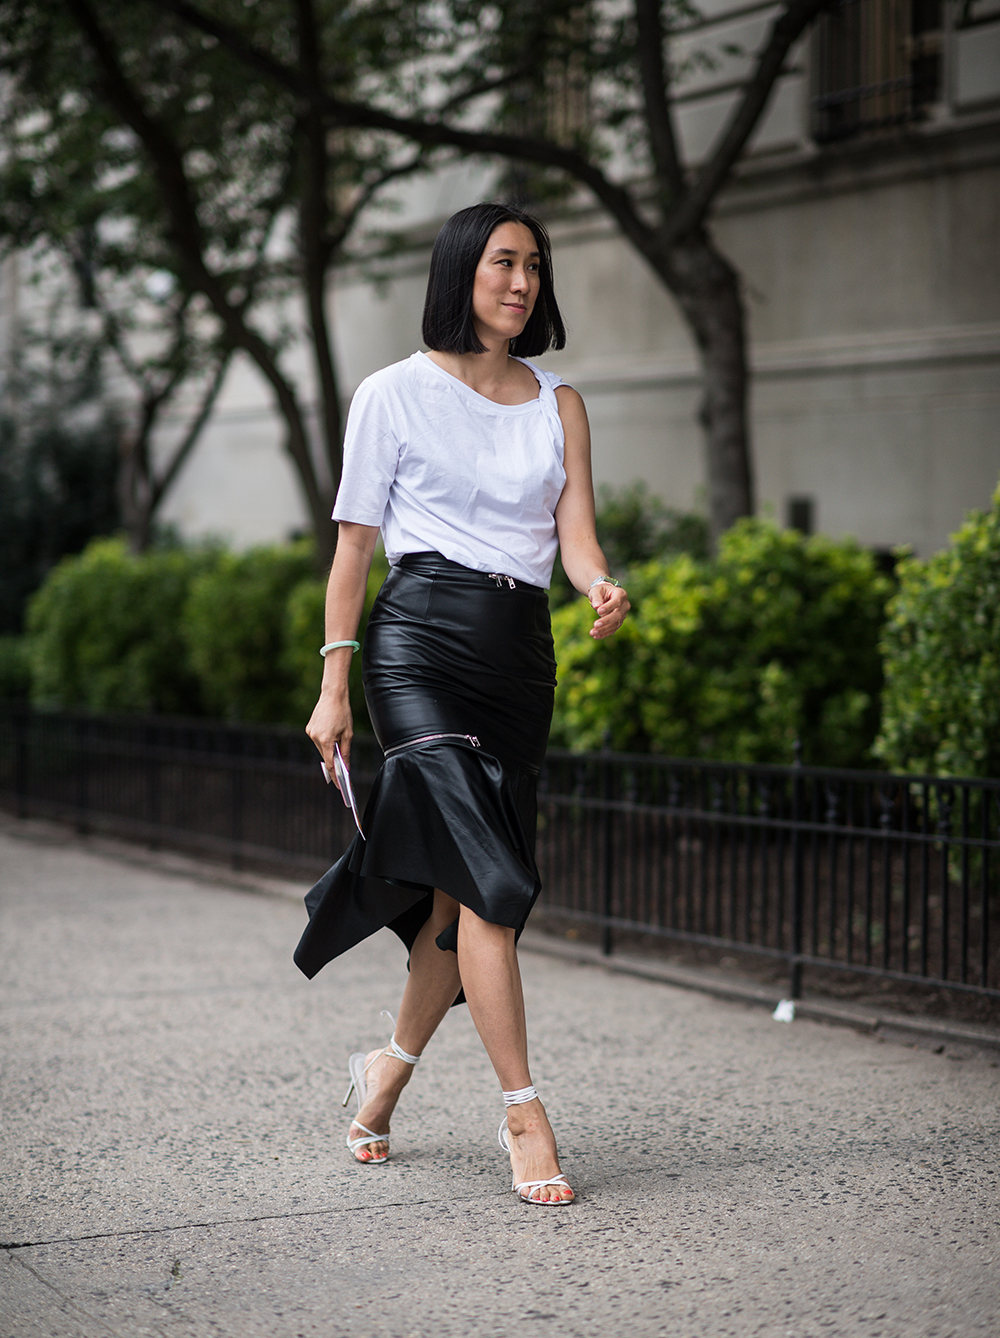 NEW YORK, NY - SEPTEMBER 07: Eva Chen seen in the streets of Manhattan during the New York Fashion Week SS19 on September 7, 2018 in New York City. (Photo by Timur Emek/Getty Images)